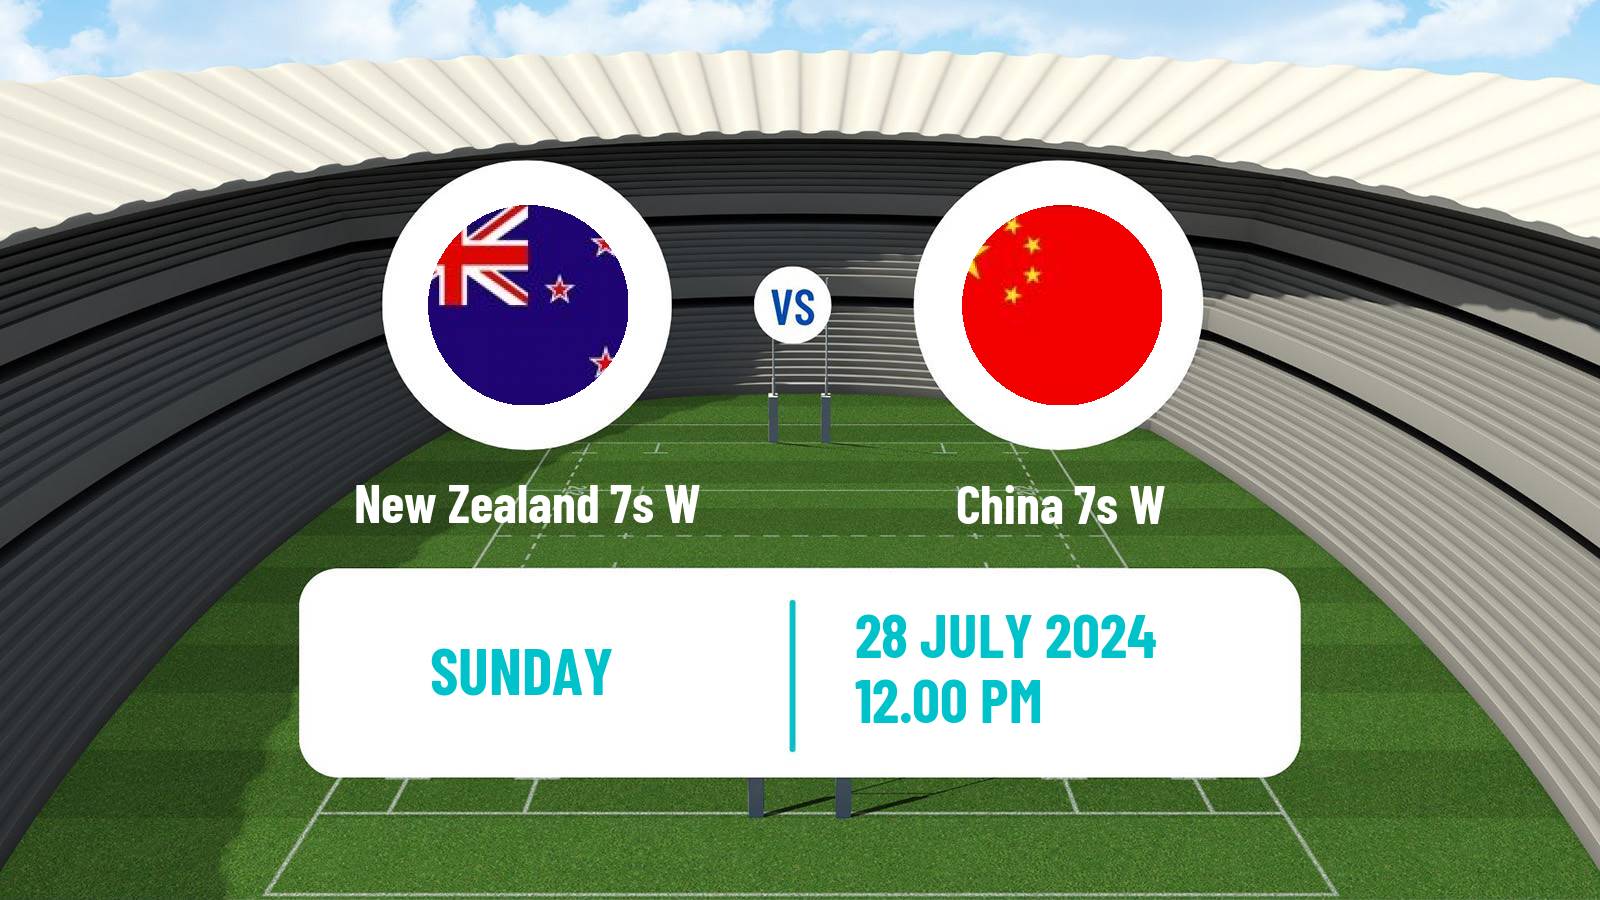 Rugby union Olympic Games 7s Rugby Women New Zealand 7s W - China 7s W